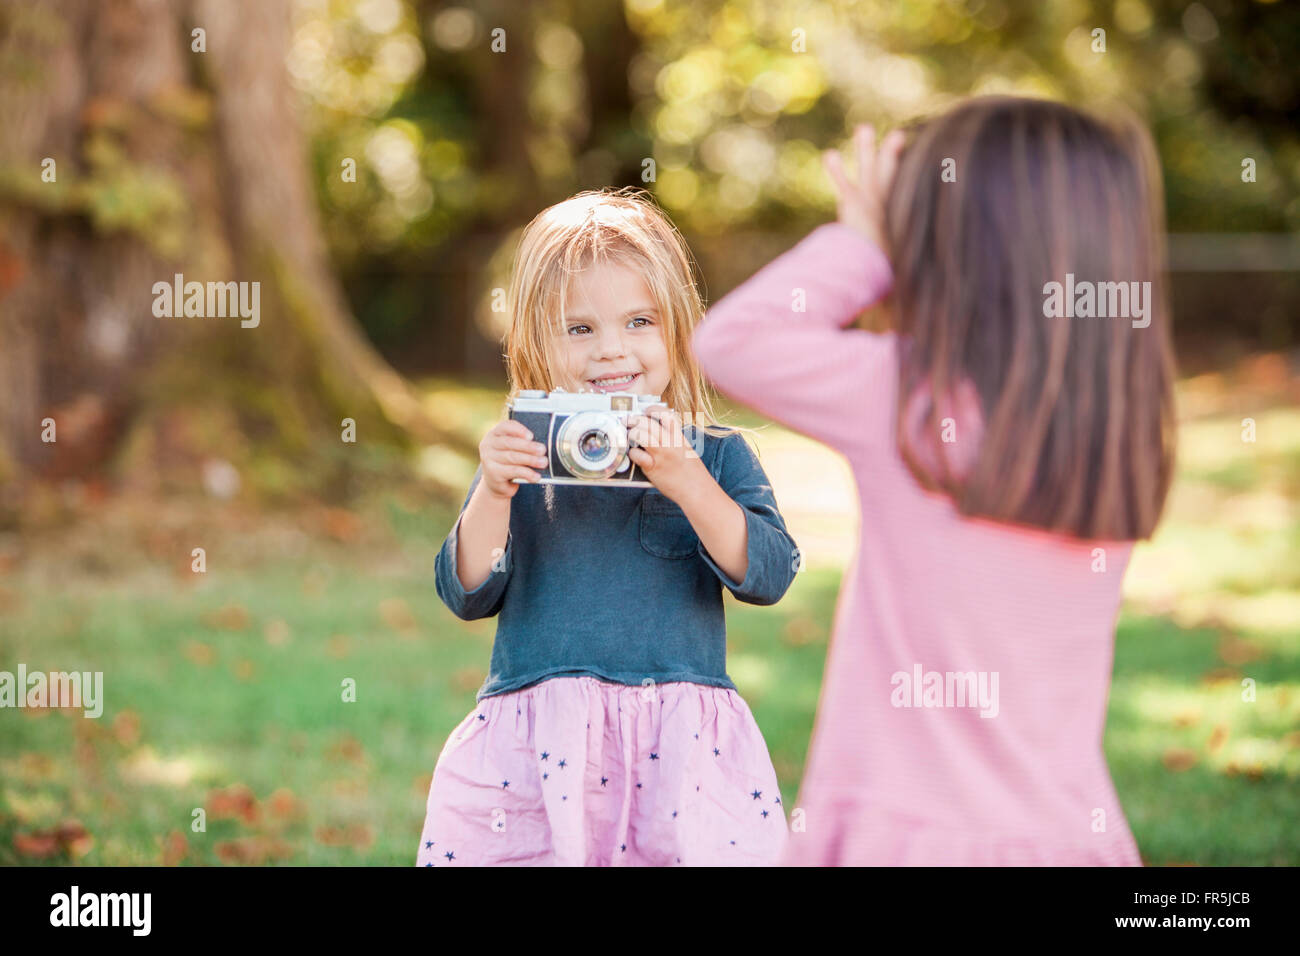 Toddler girls playing with camera in park Stock Photo